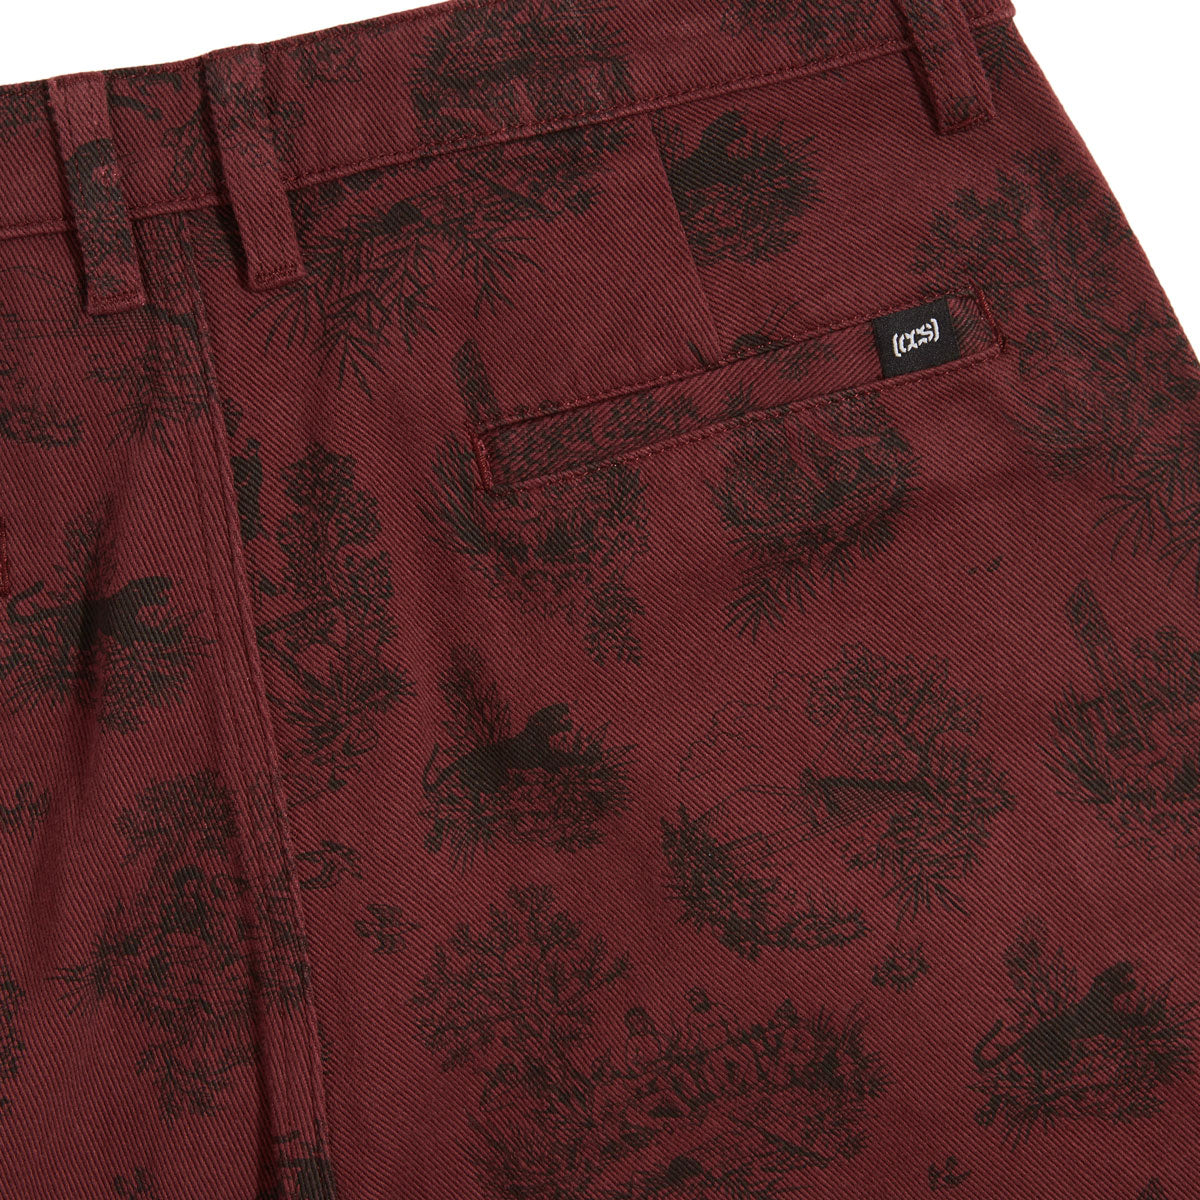 CCS Original Relaxed Toile Chino Pants - Oxblood image 6